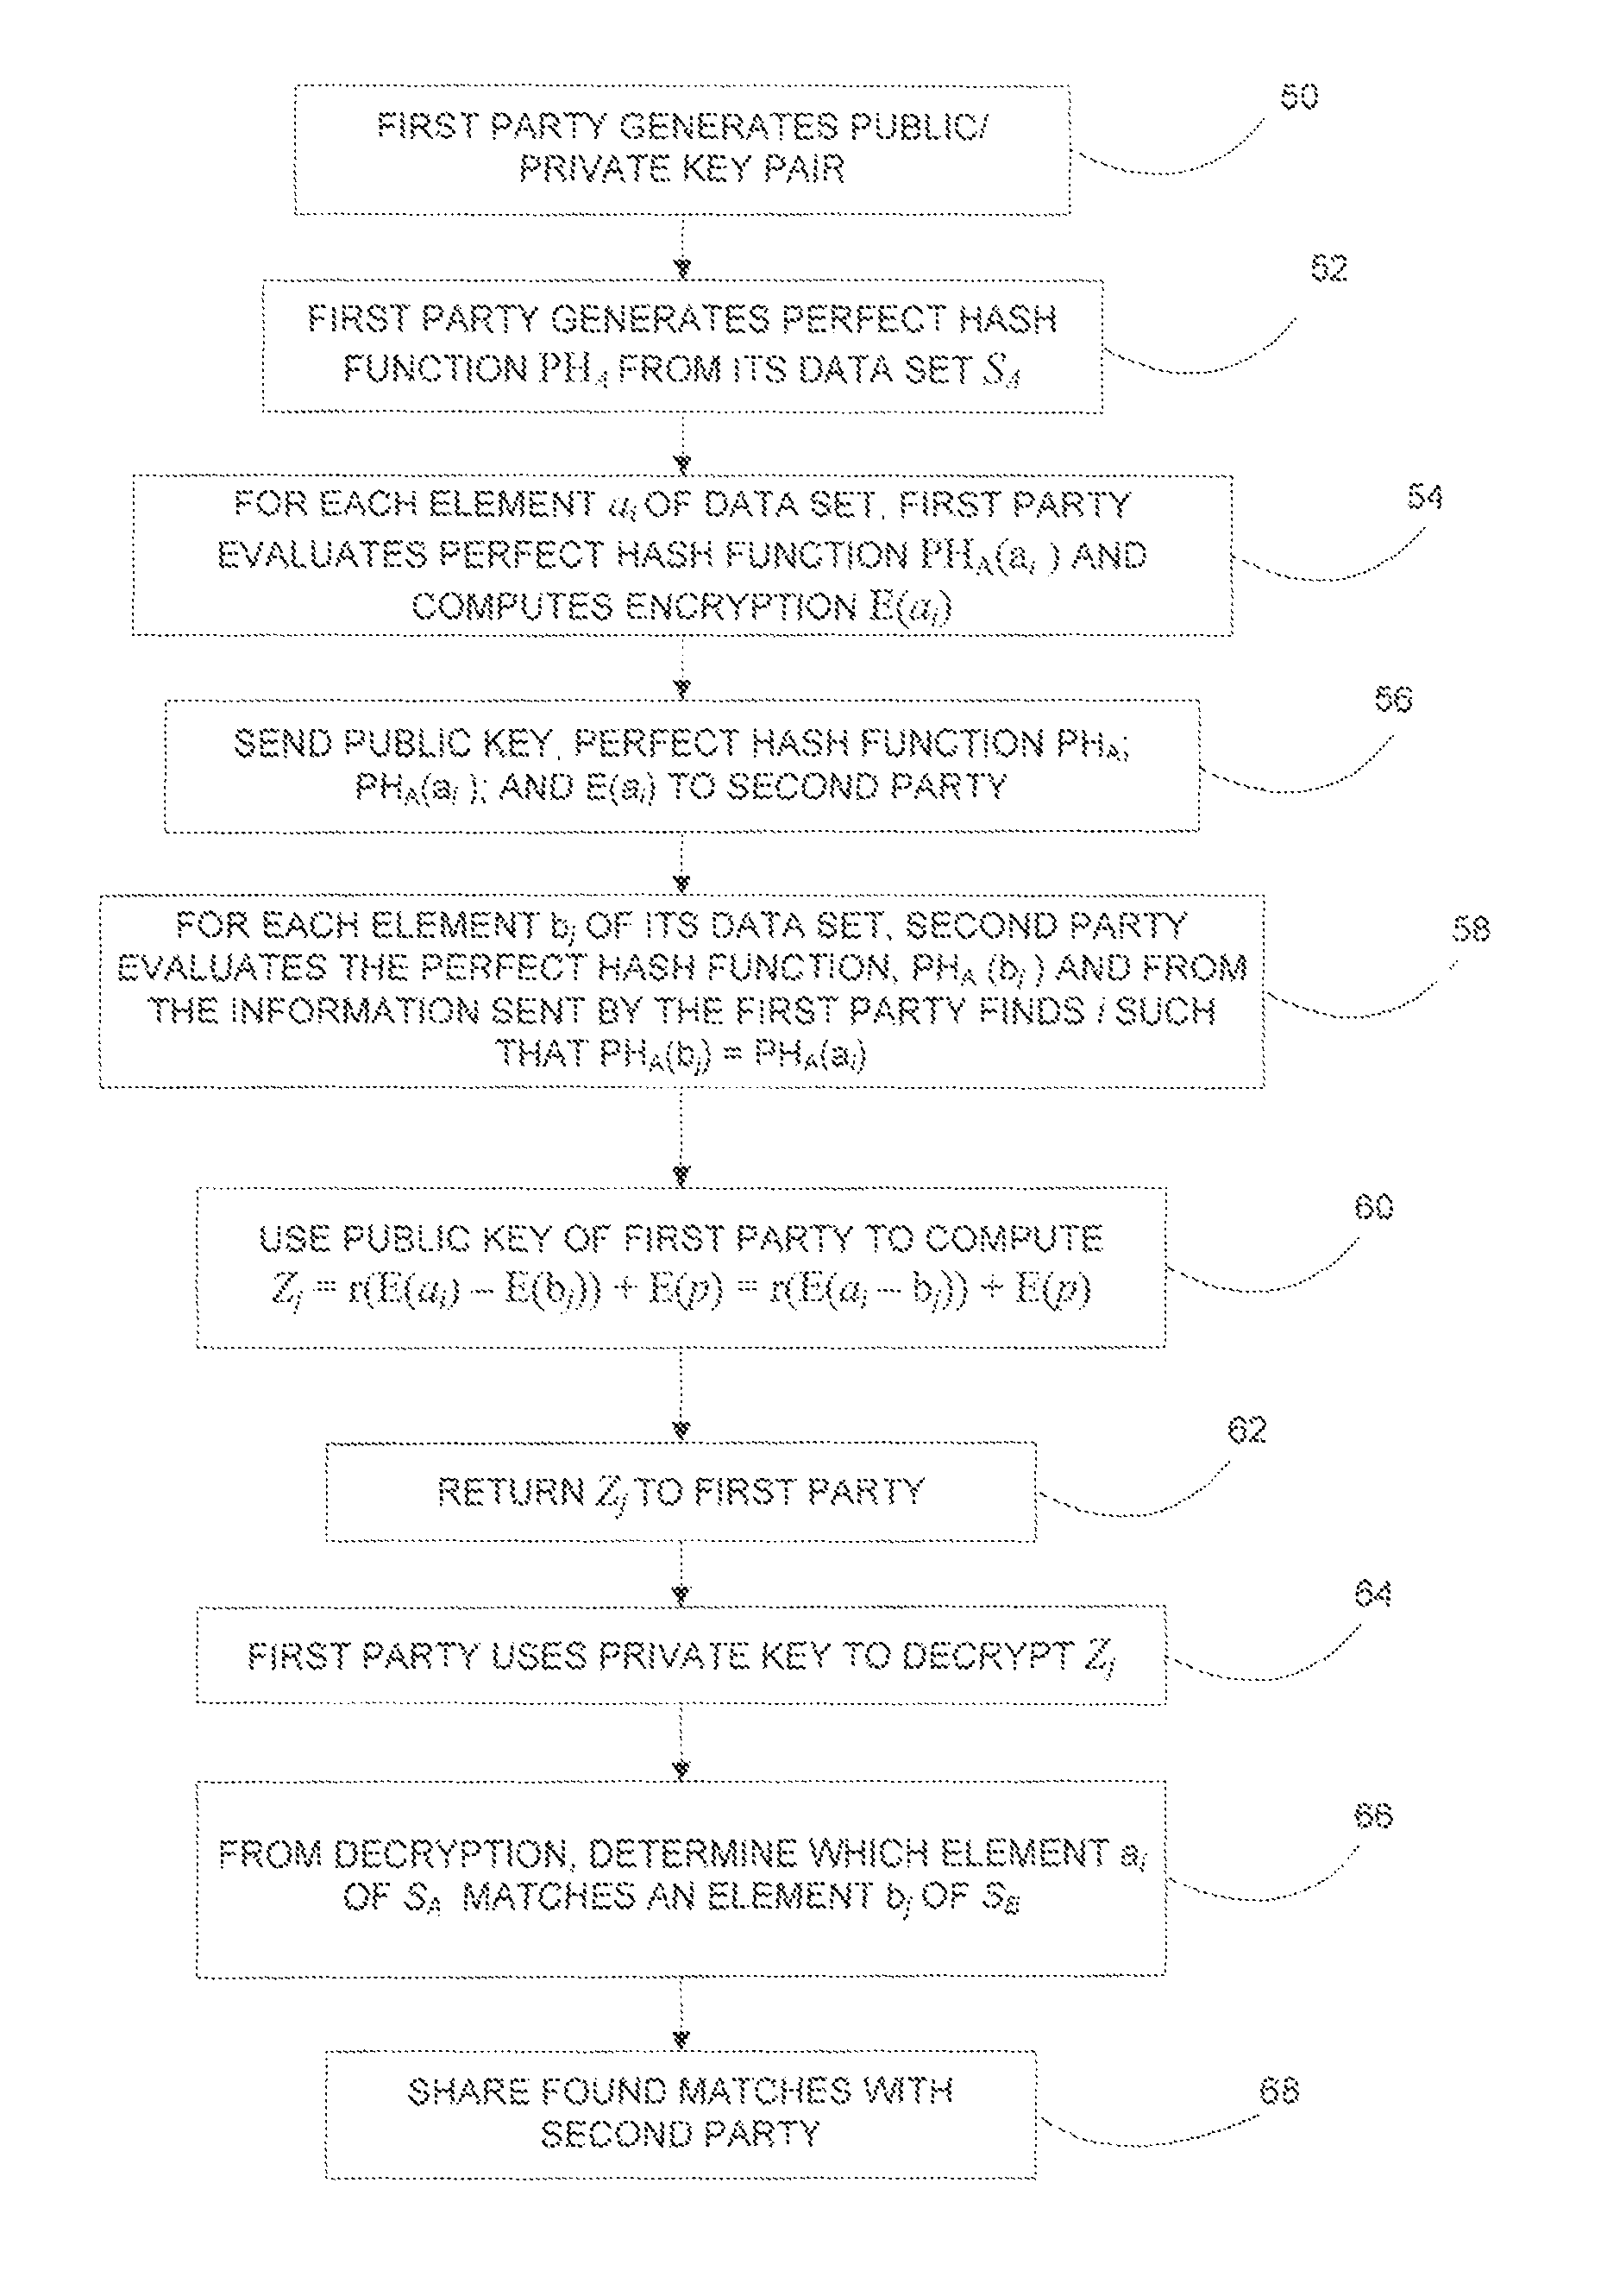 System and method for matching data sets while maintaining privacy of each data set